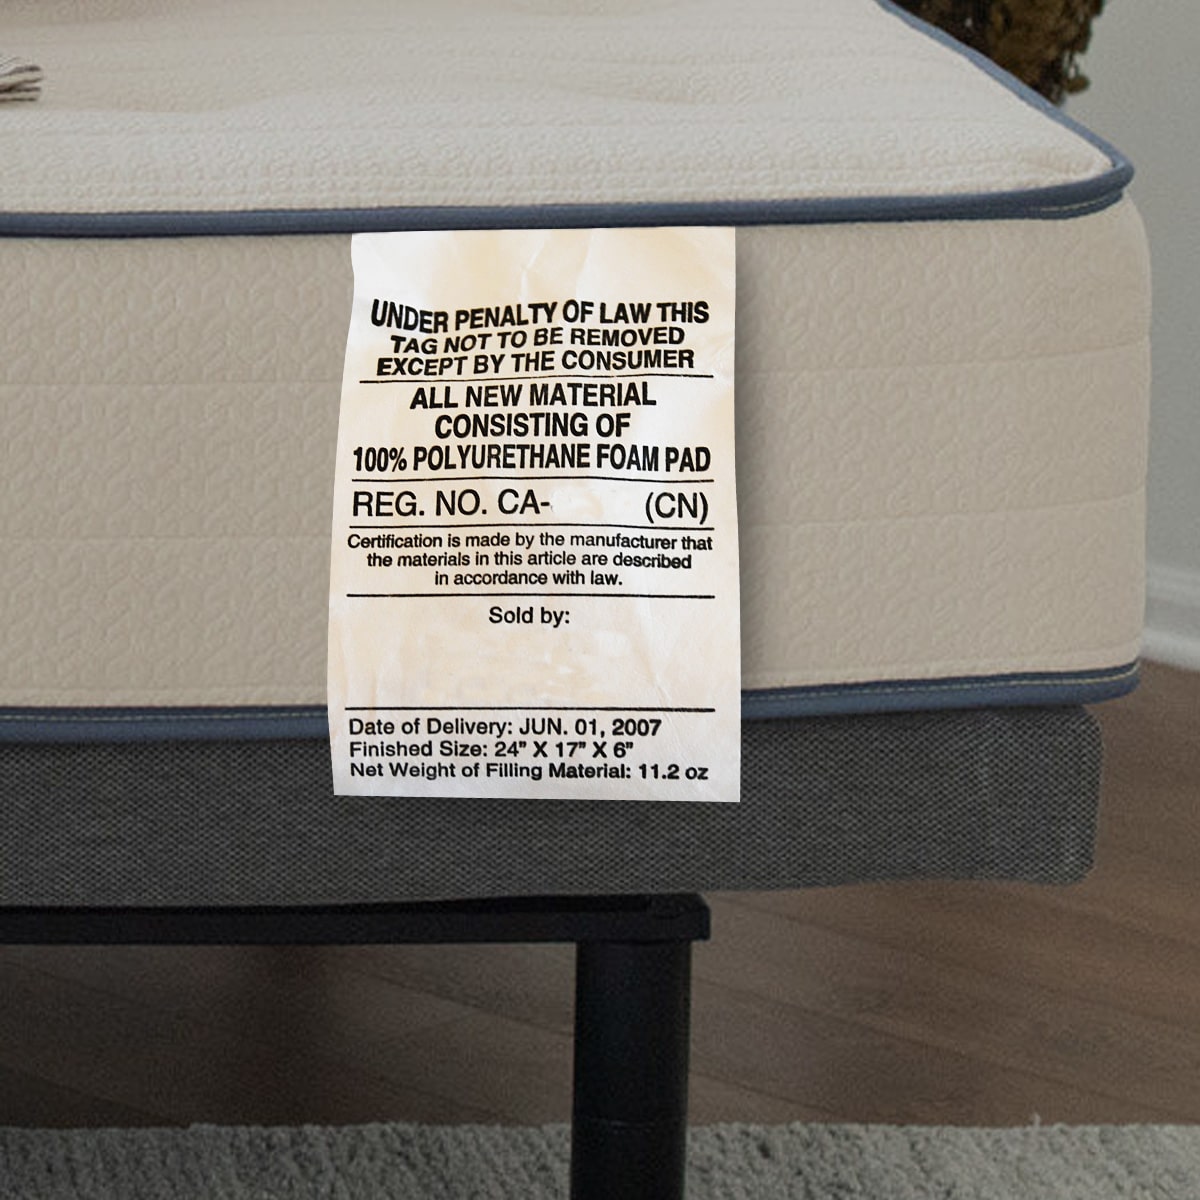 Why Is Ripping The Tag Of A Mattress Illegal?